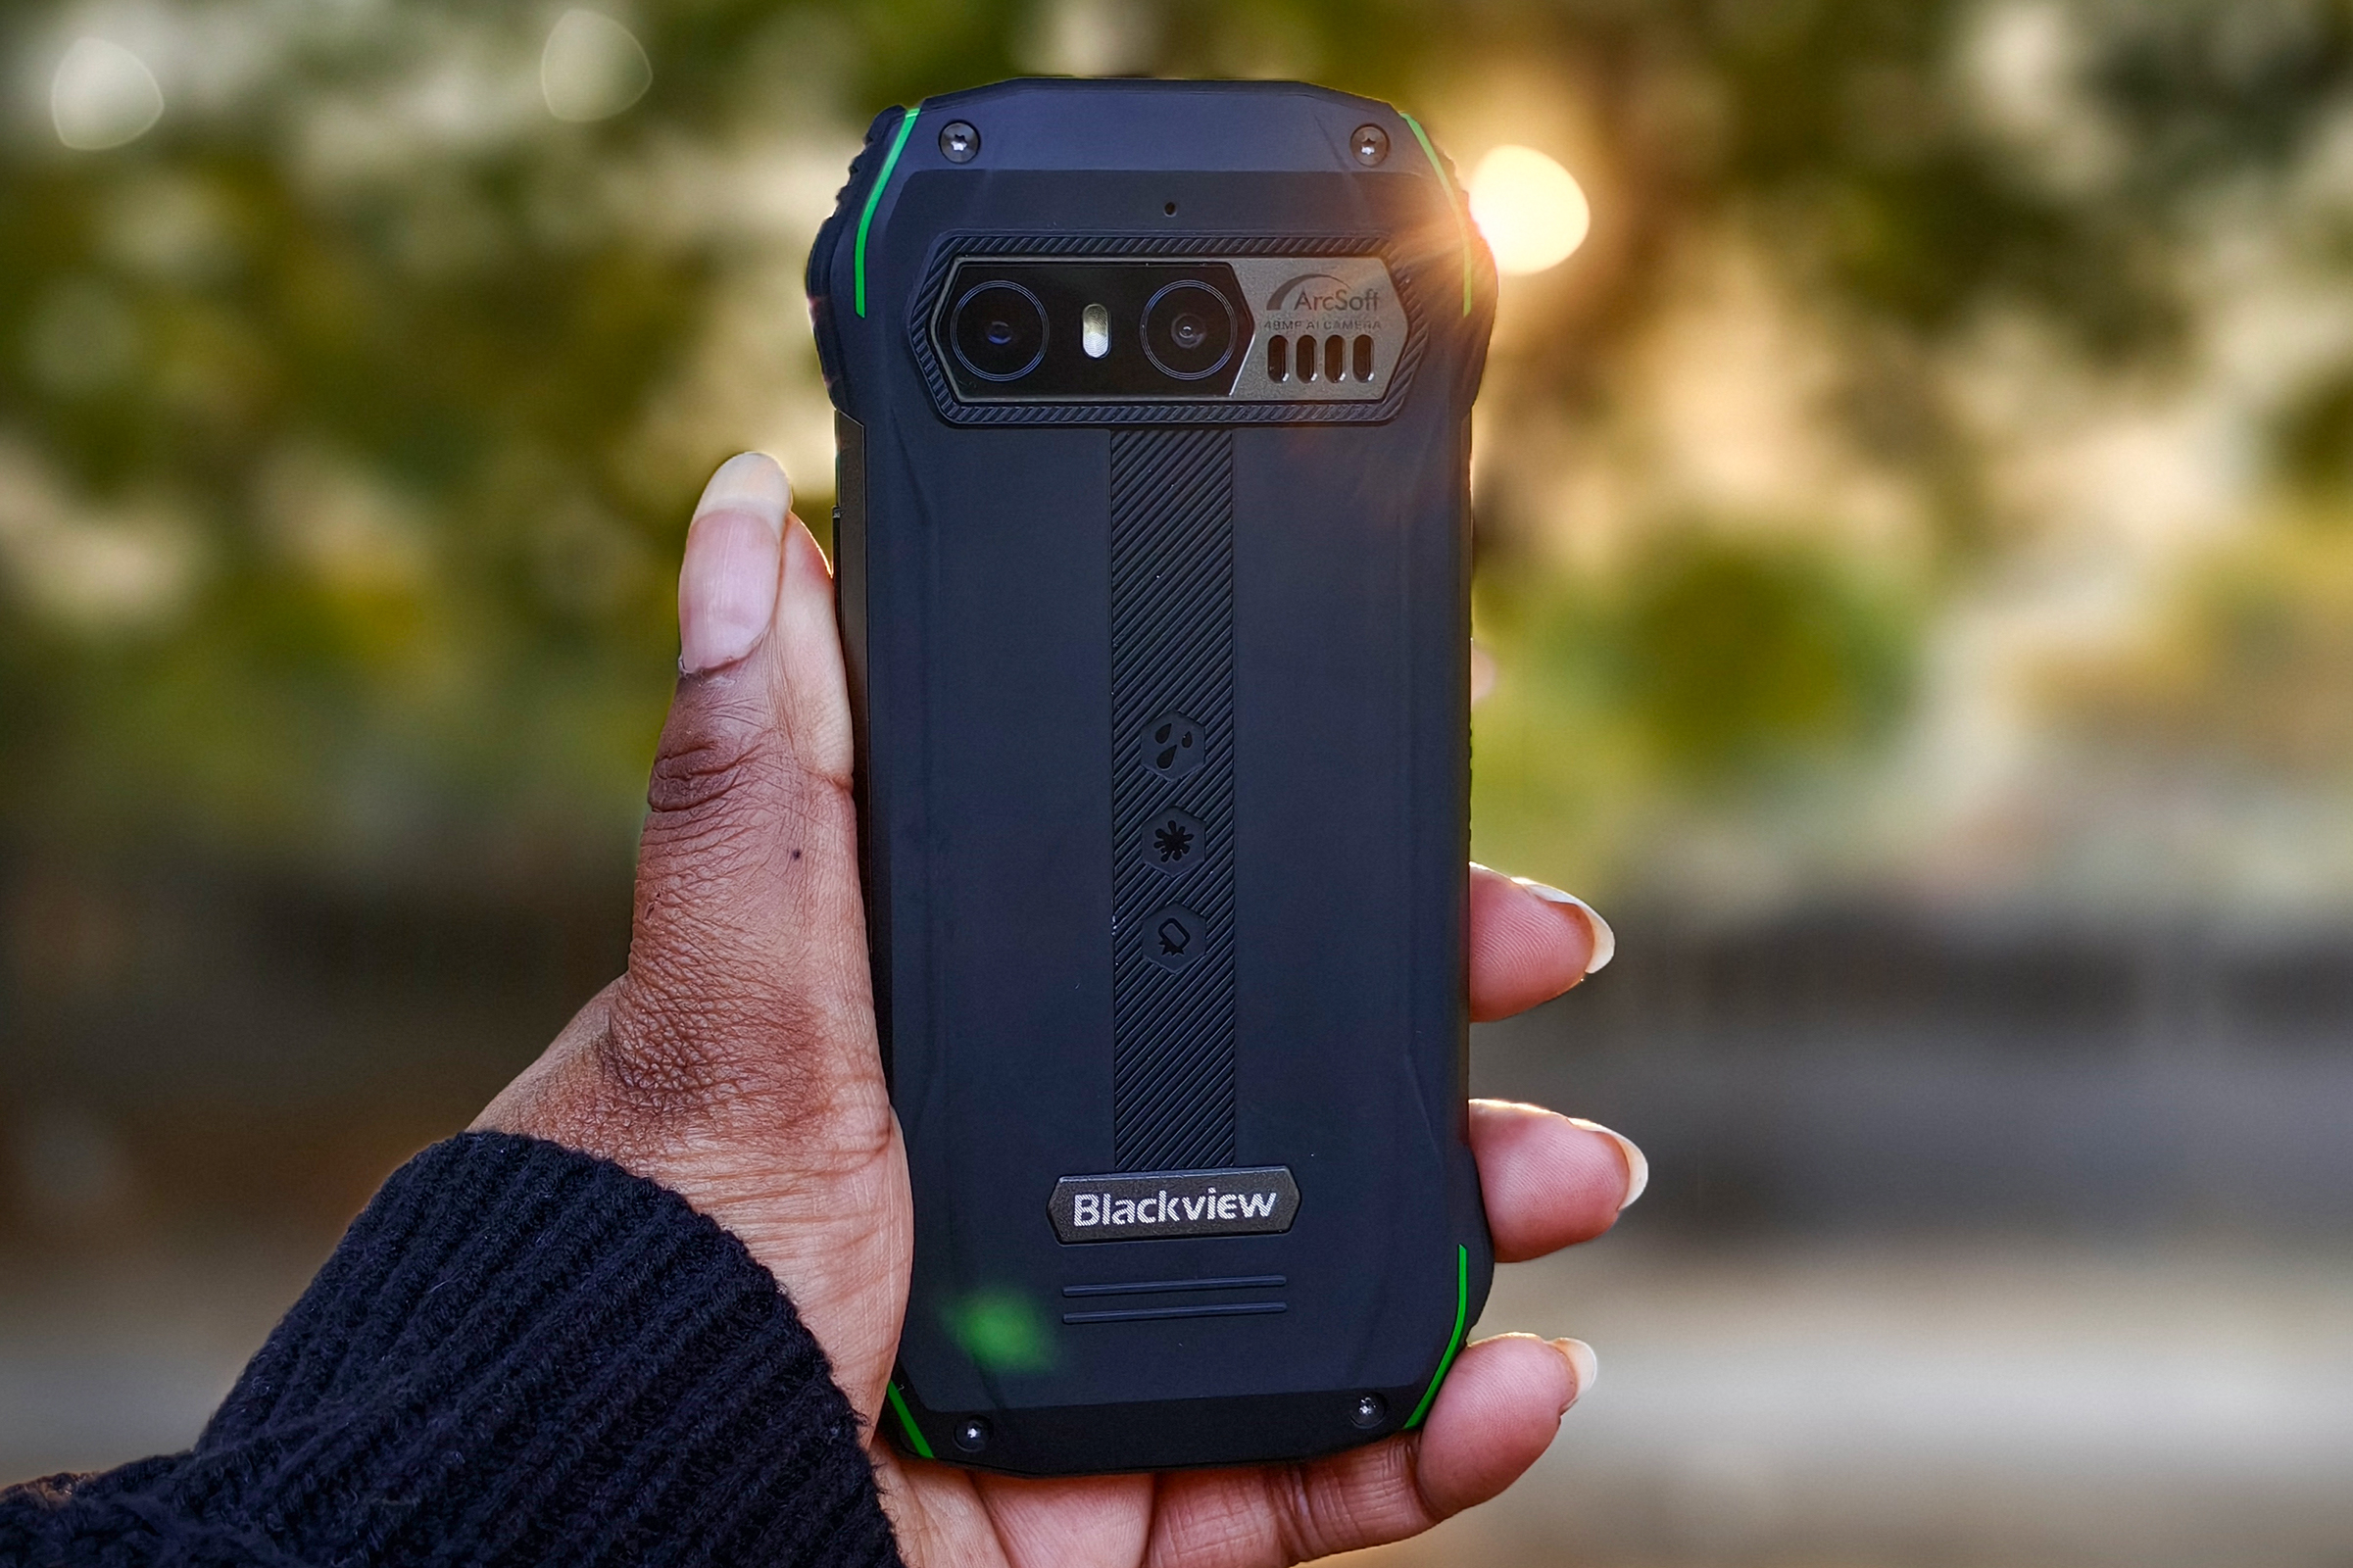 Person holding Blacview N6000 tiny rugged Android phone in hand against setting sun peaking through trees.